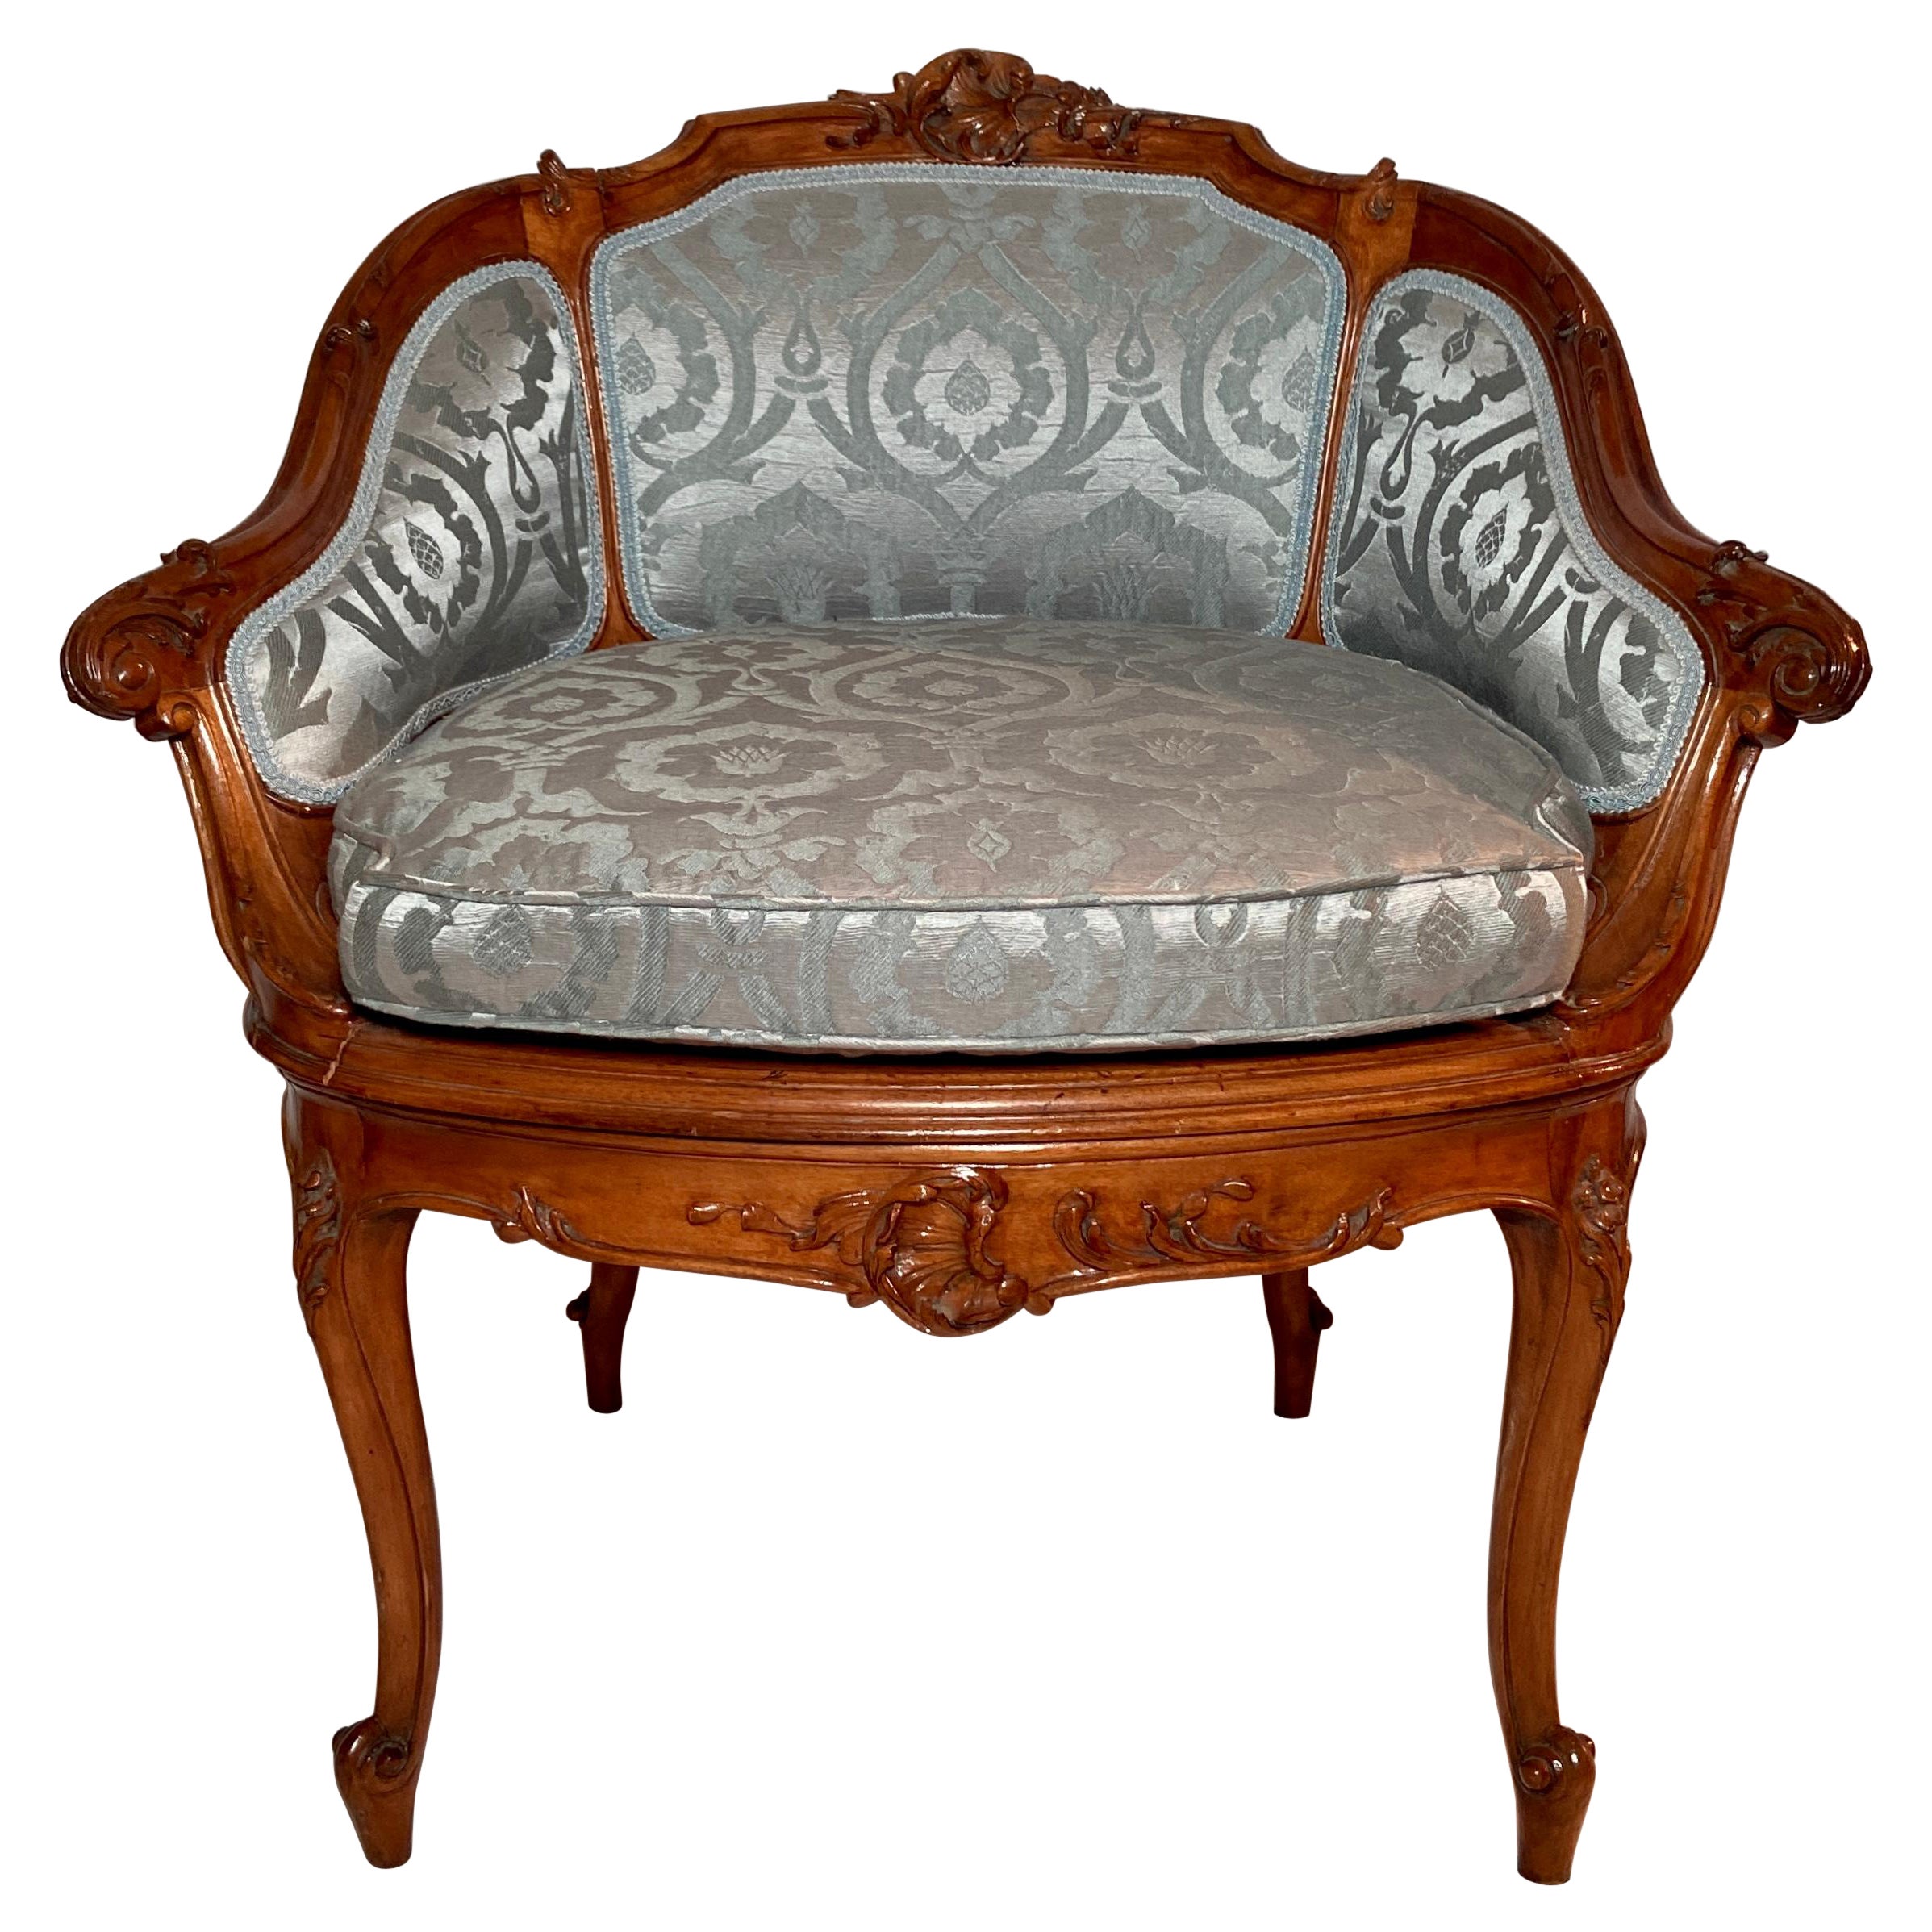 Antique French Carved Fruitwood Coiffeuse Vanity Chair, Blue Upholstery, Ca 1880